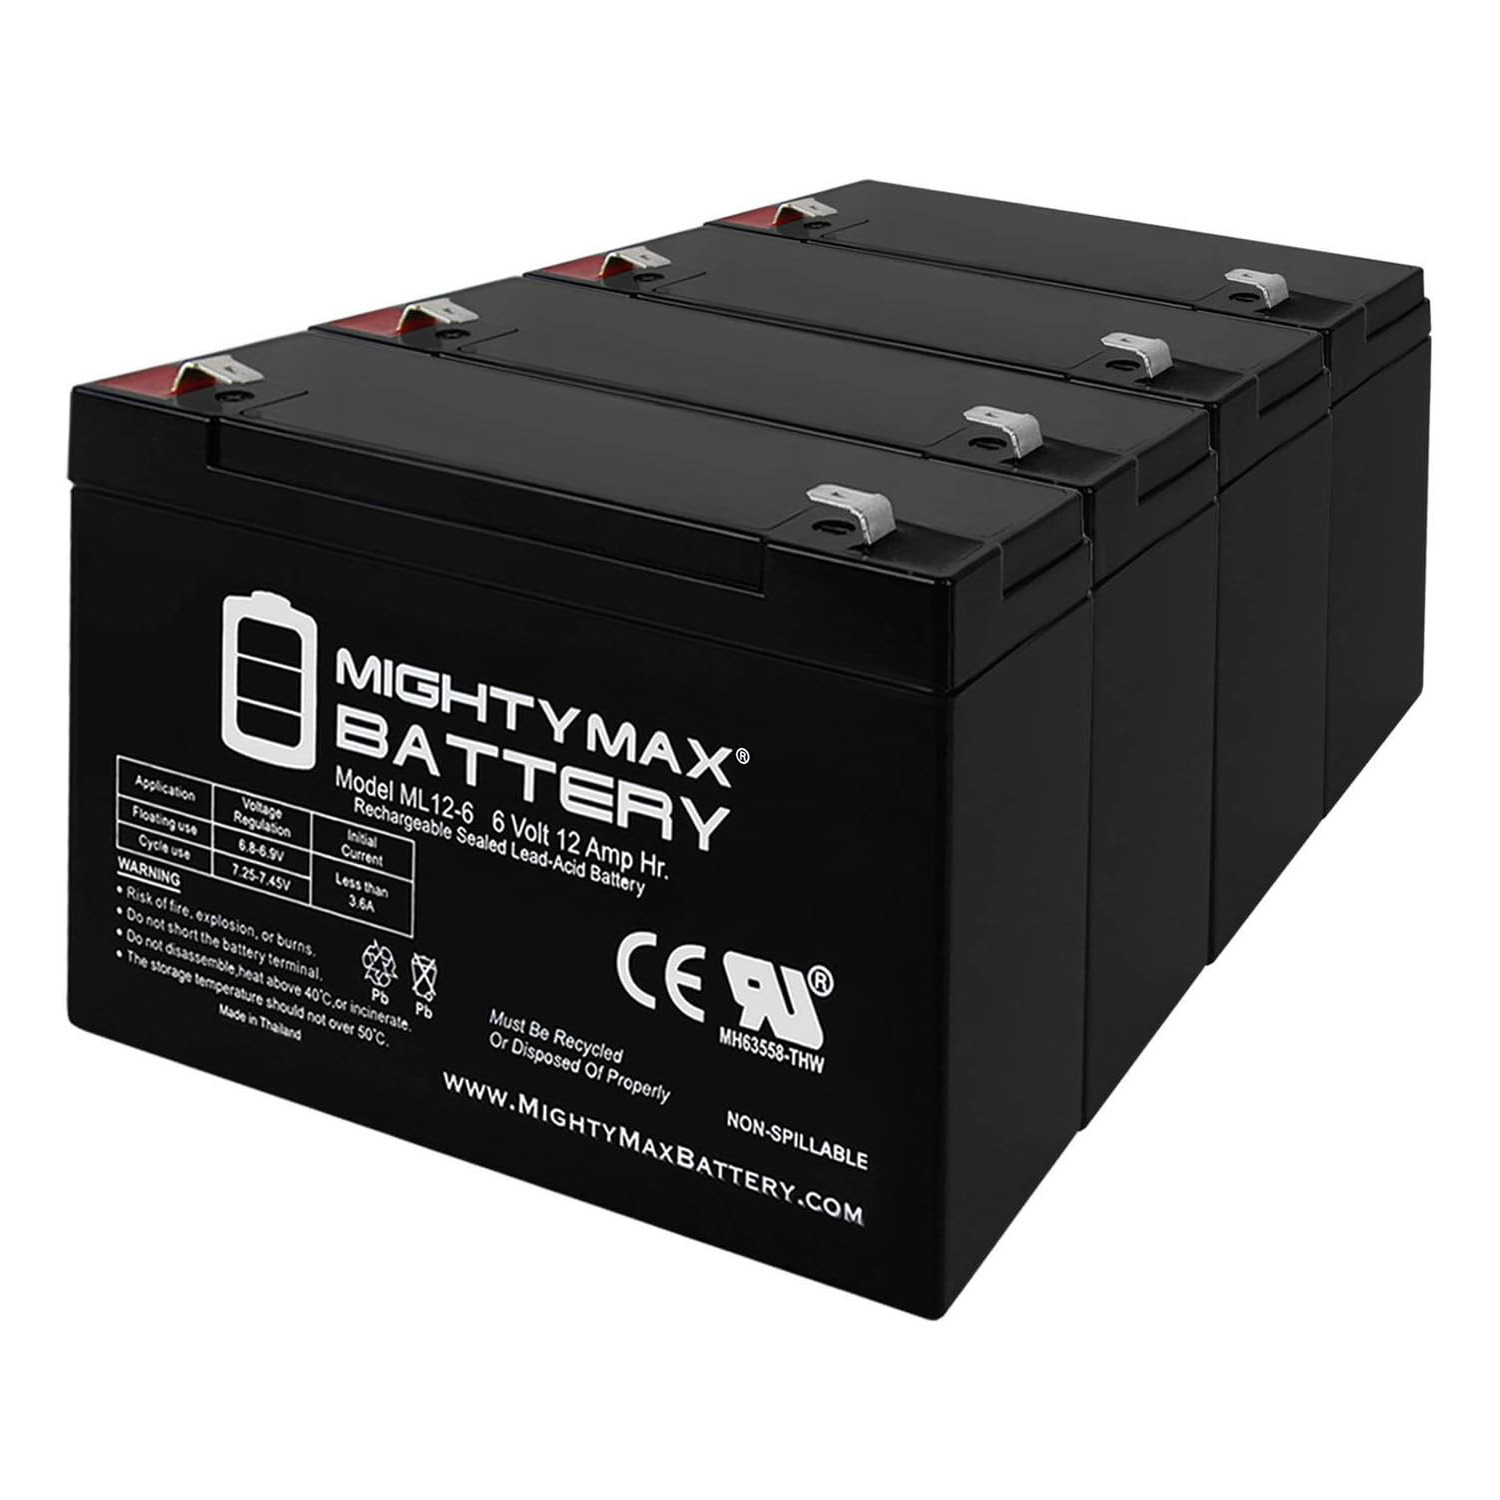 6V 12AH F2 Replacement Battery Compatible with Para Systems-Minuteman BP24V20, BP48V10 UPS - 4 Pack